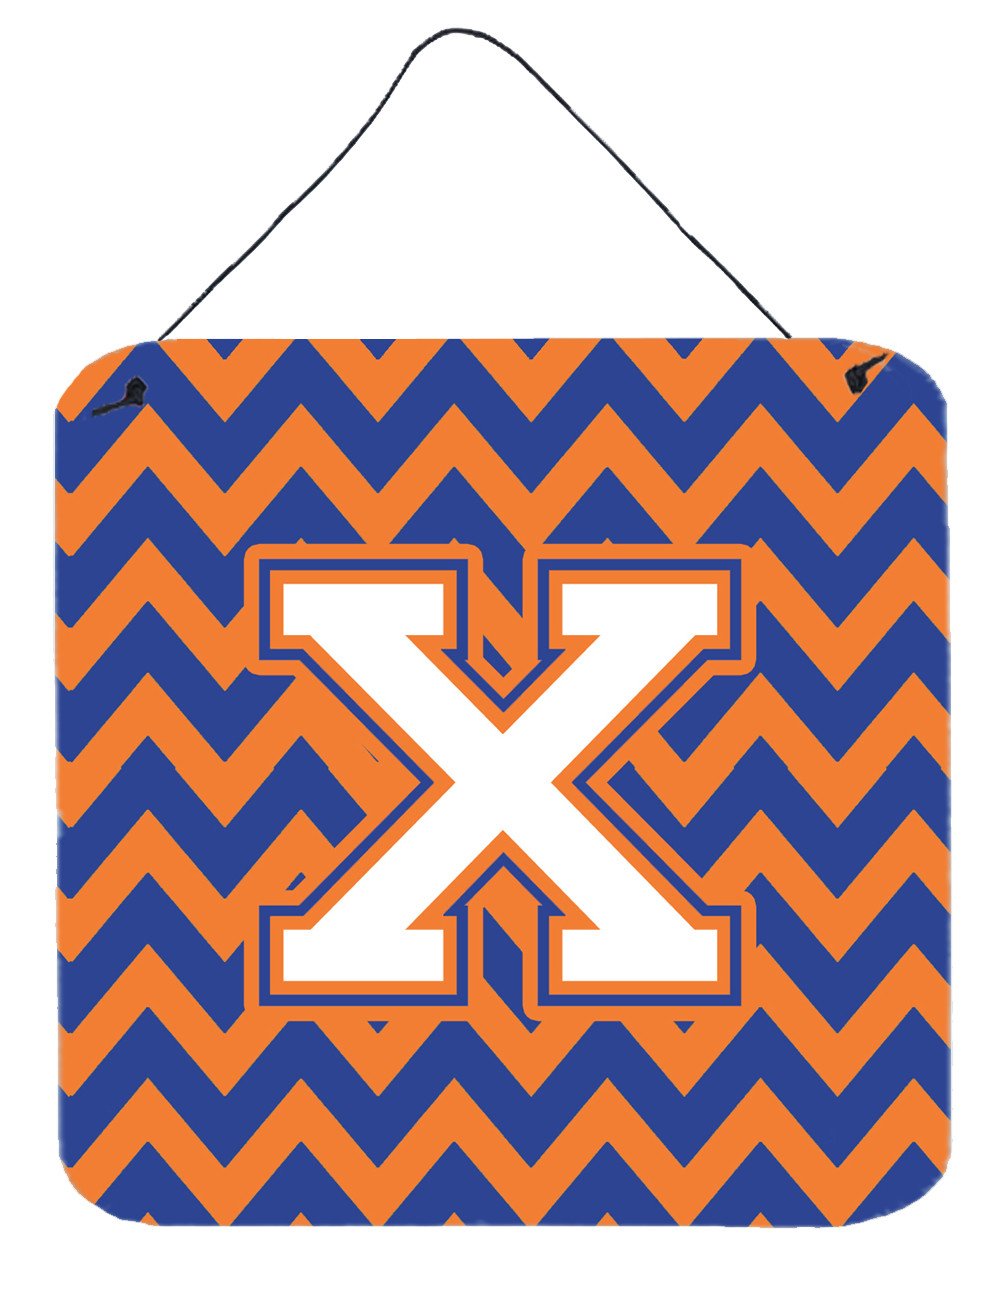 Letter X Chevron Blue and Orange #3 Wall or Door Hanging Prints CJ1060-XDS66 by Caroline's Treasures